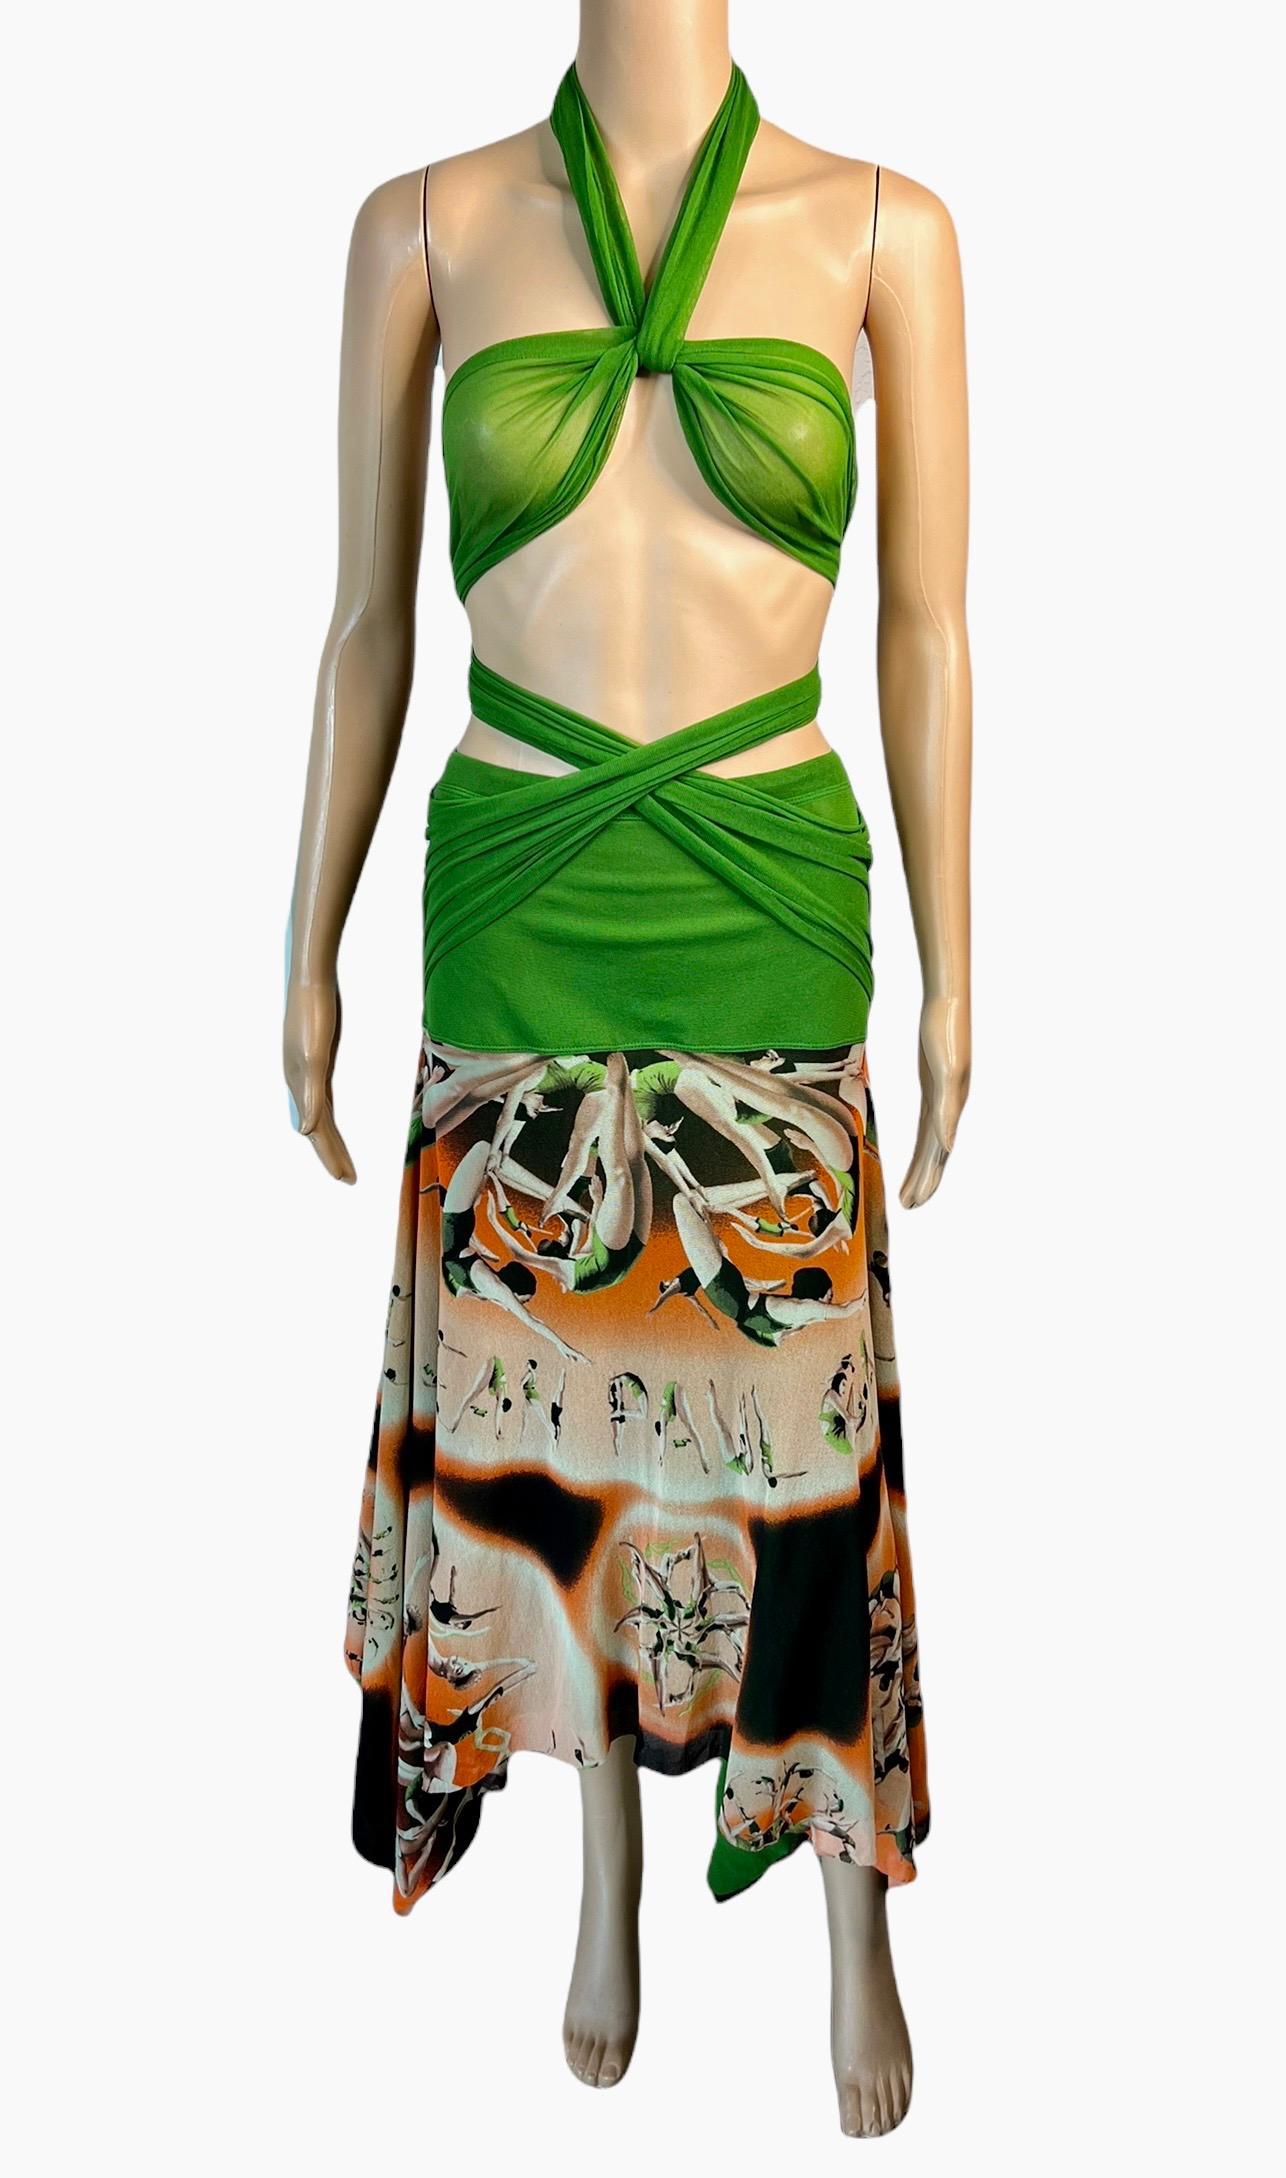 Jean Paul Gaultier Soleil Logo People Print Semi-Sheer Mesh Maxi Skirt Dress Size S

Please note this piece is very versatile and it could be styled as a strapless dress or a maxi skirt based on preference.